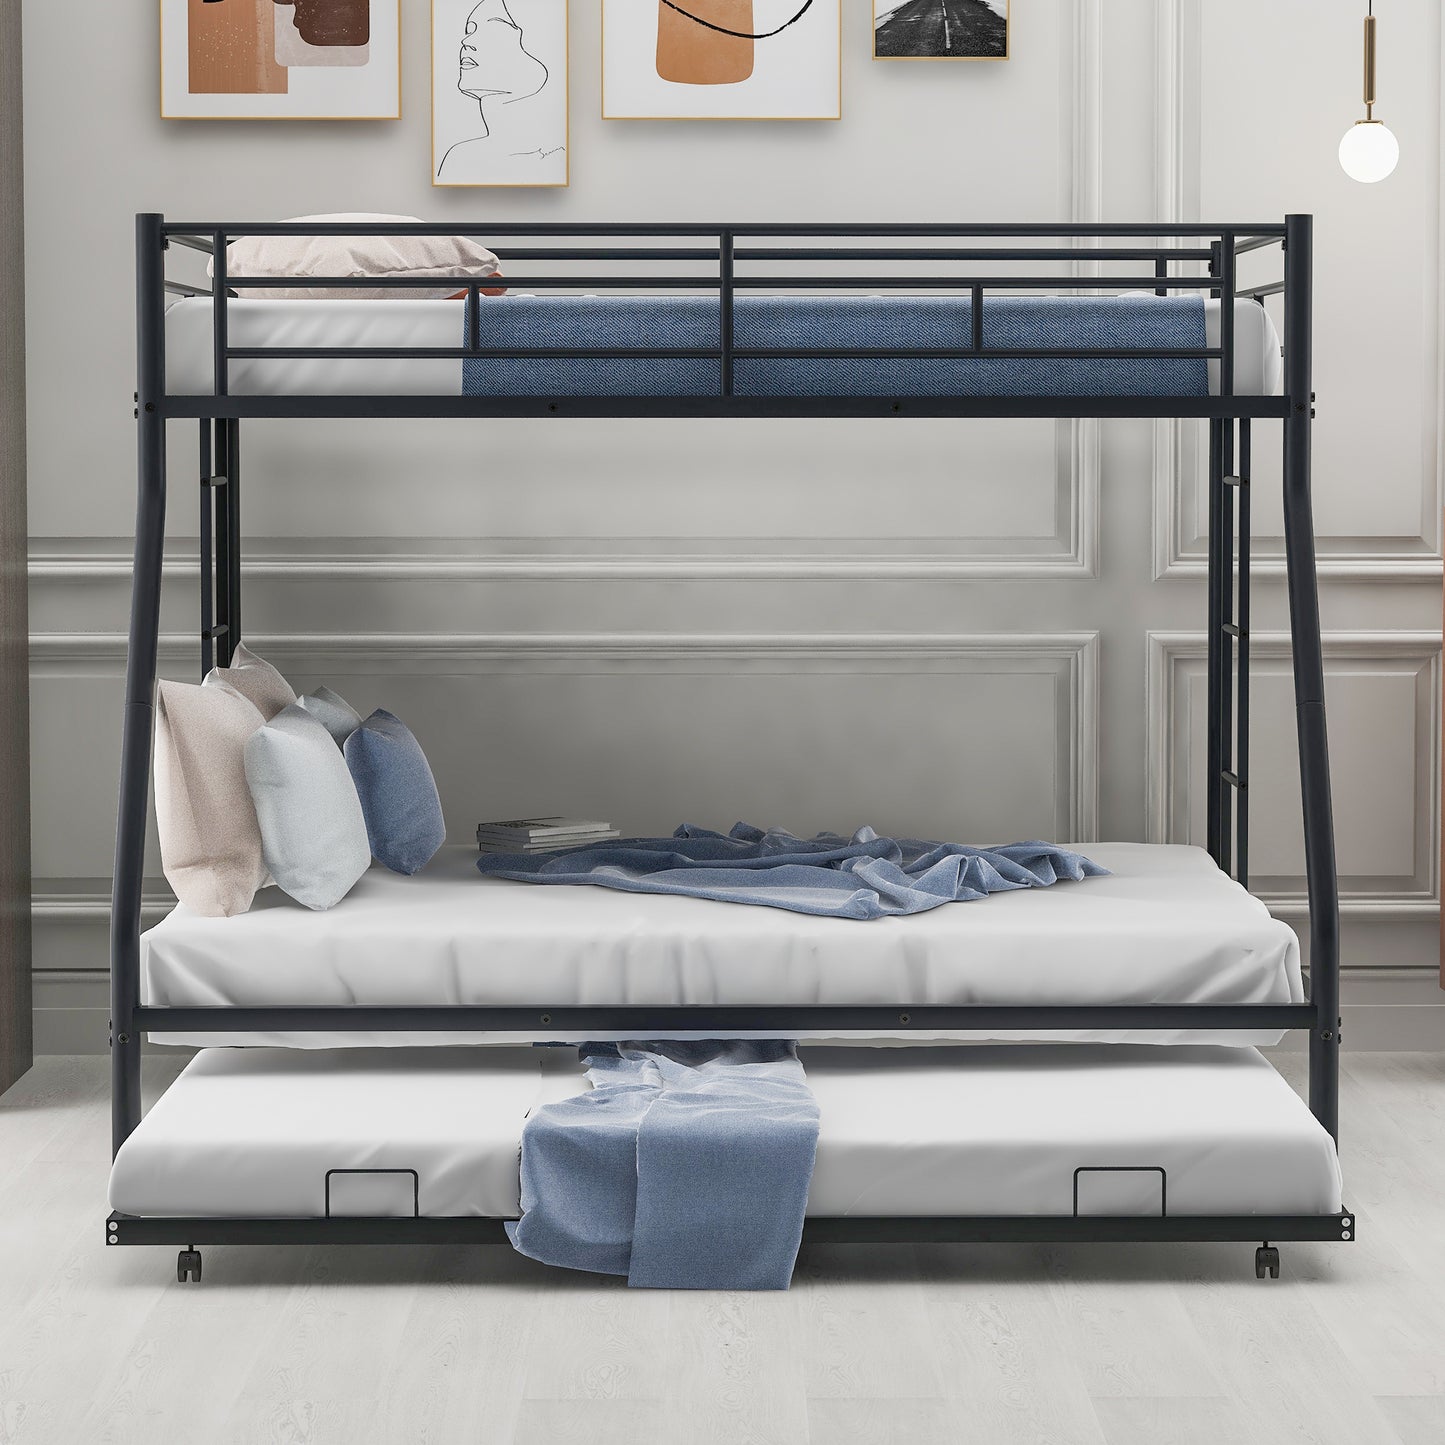 Bunk Bed Twin Over Twin, HSUNNS Metal Bunk Bed with Trundle, Twin Size Convertible Trundle Bunk Bed Frame for Kids Teens, Dorm Room Metal Twin Bed Frame with Ladder, No Box Spring Needed, Silver, A4279